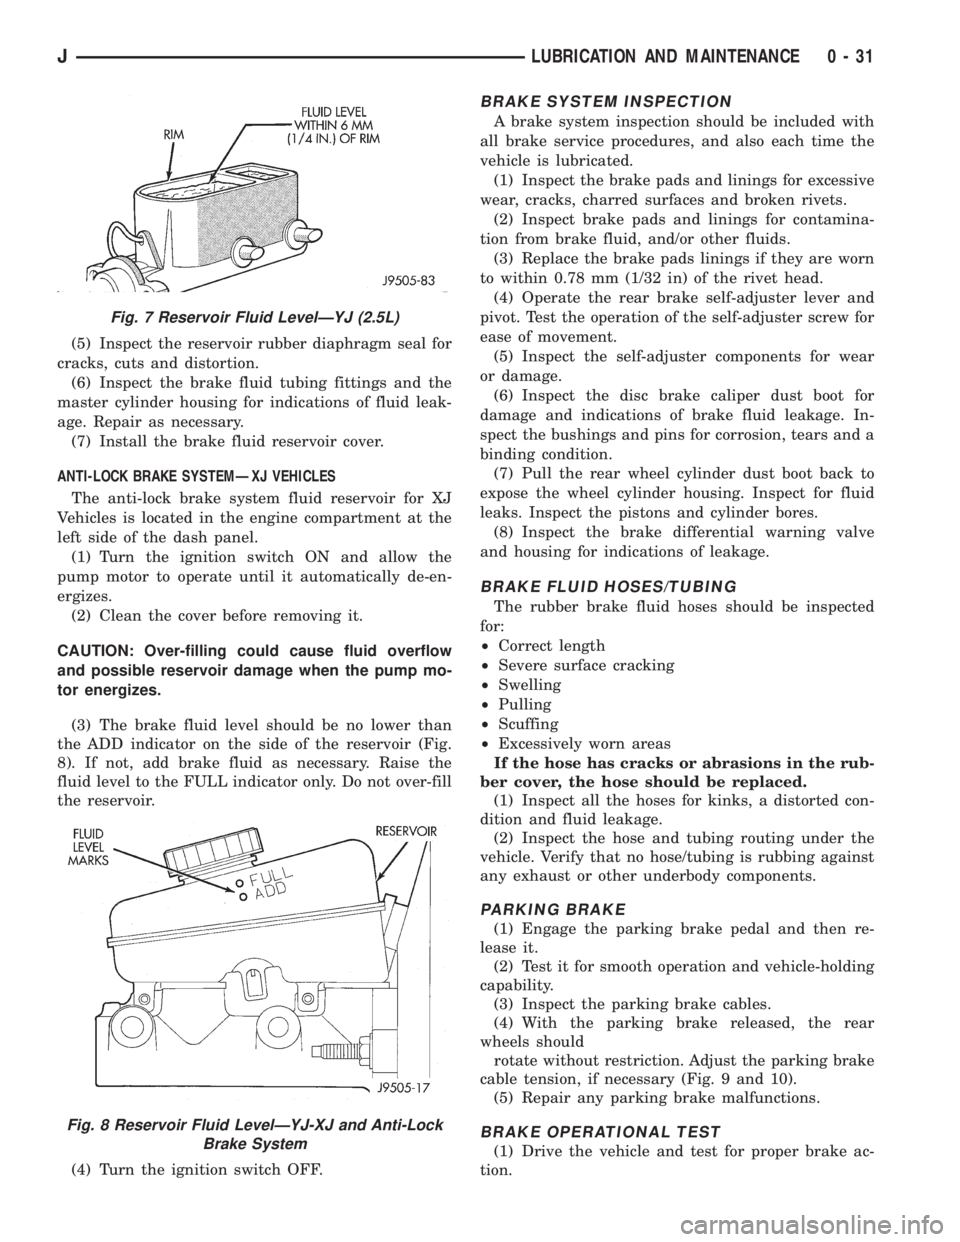 JEEP YJ 1995  Service And Service Manual (5) Inspect the reservoir rubber diaphragm seal for
cracks, cuts and distortion.
(6) Inspect the brake fluid tubing fittings and the
master cylinder housing for indications of fluid leak-
age. Repair 